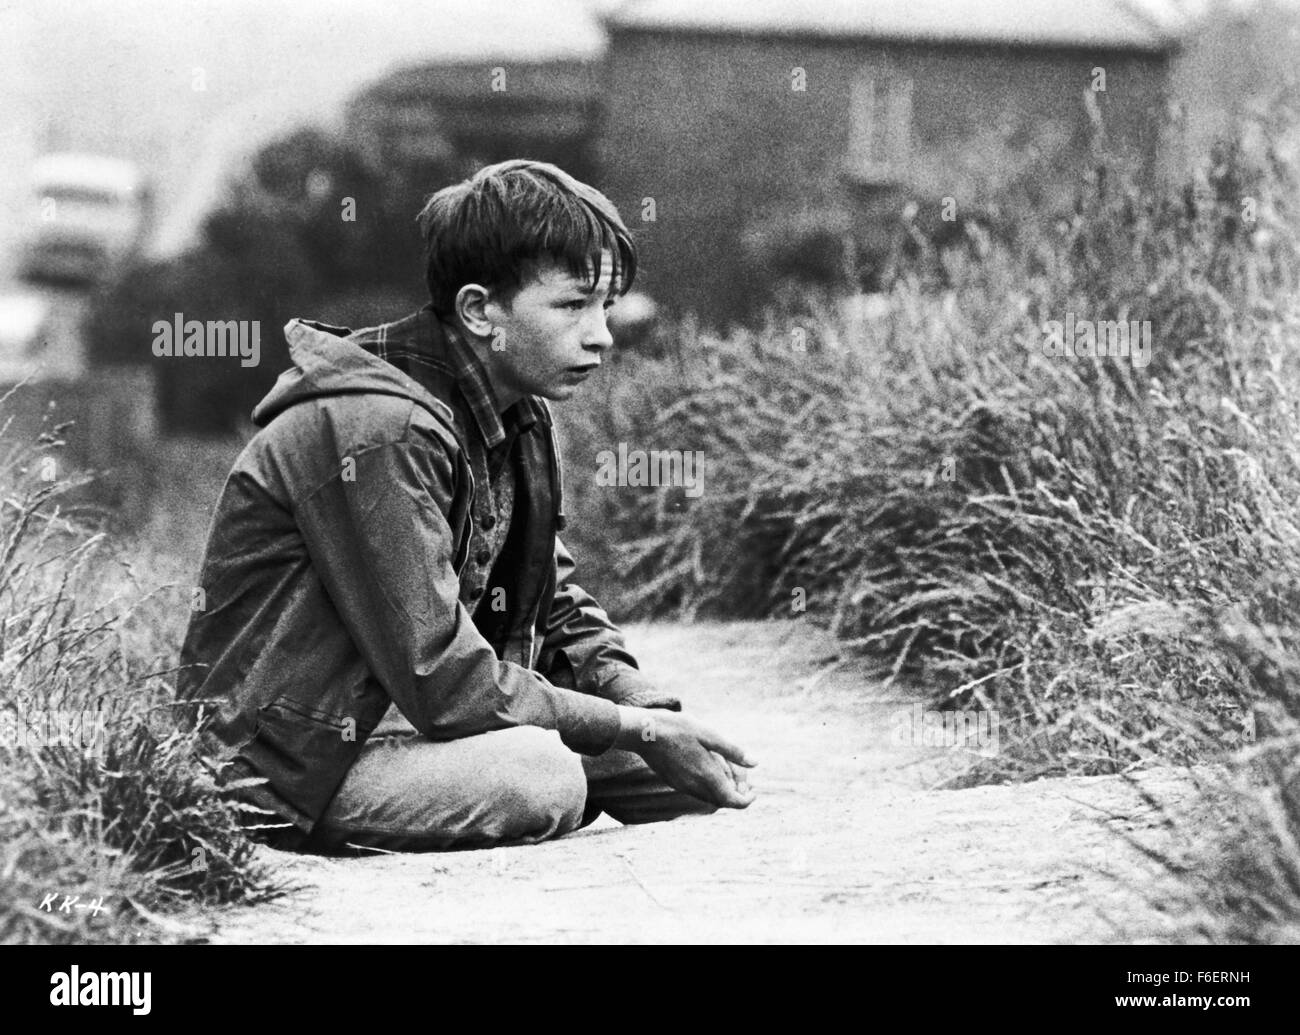 RELEASE DATE: June 19th, 1970. MOVIE TITLE: Kes. STUDIO: MGM. PLOT: Bullied at school and ignored and abused at home by his indifferent mother and older brother, Billy Casper, a 15-year-old working-class Yorkshire boy, tames and trains his pet kestrel falcon whom he names Kes. Helped and encouraged by his English teacher Mr. Farthing and his fellow students, Billy finally finds a positive purpose to his unhappy existence, until tragedy strikes. PICTURED: DAVID BRADLEY as Billy. Stock Photo